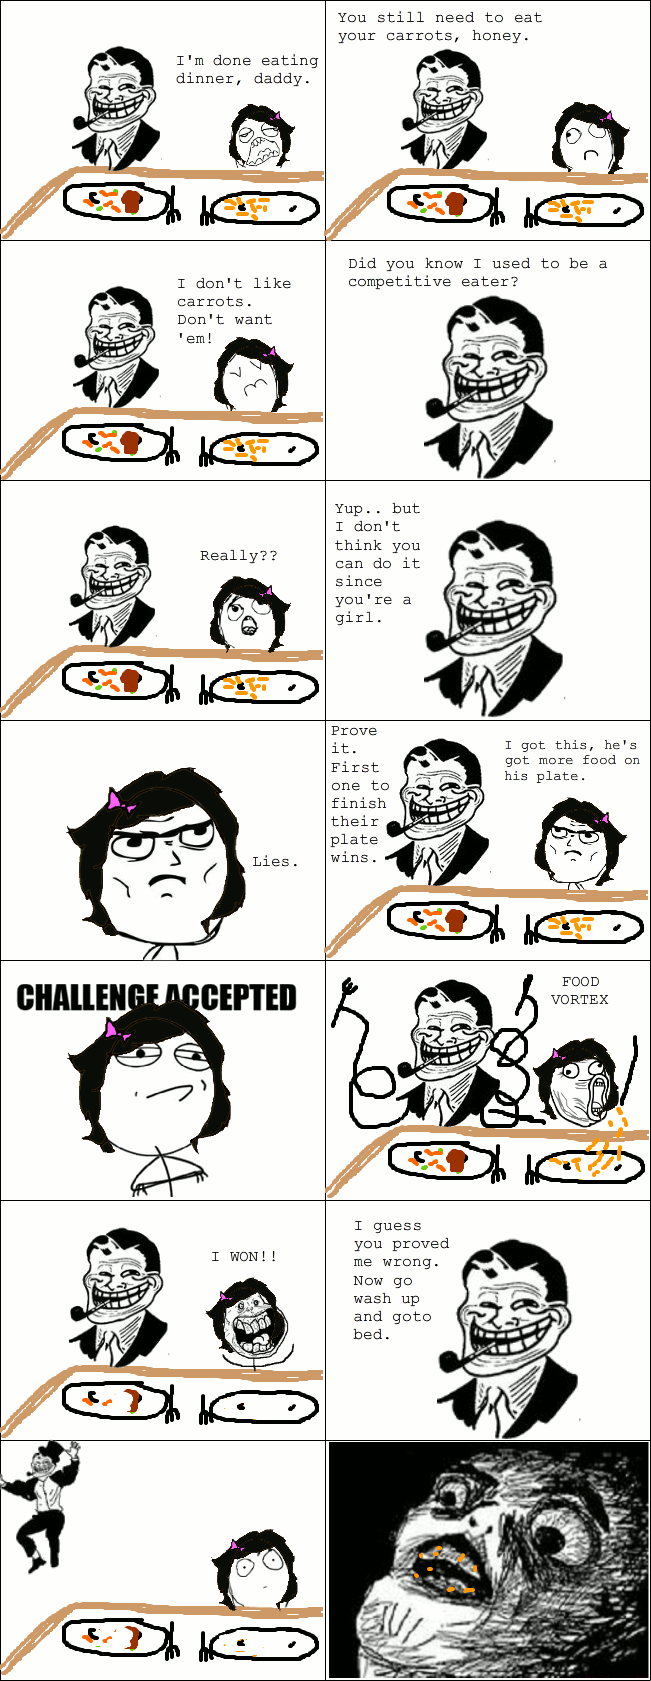 rage comic troll dad - You still need to eat your carrots, honey. I'm done eating dinner, daddy. Did you know I used to be a competitive eater? I don't carrots. Don't want 'em! legi Really?? Yup.. but I don't think you can do it since you're a girl. I got